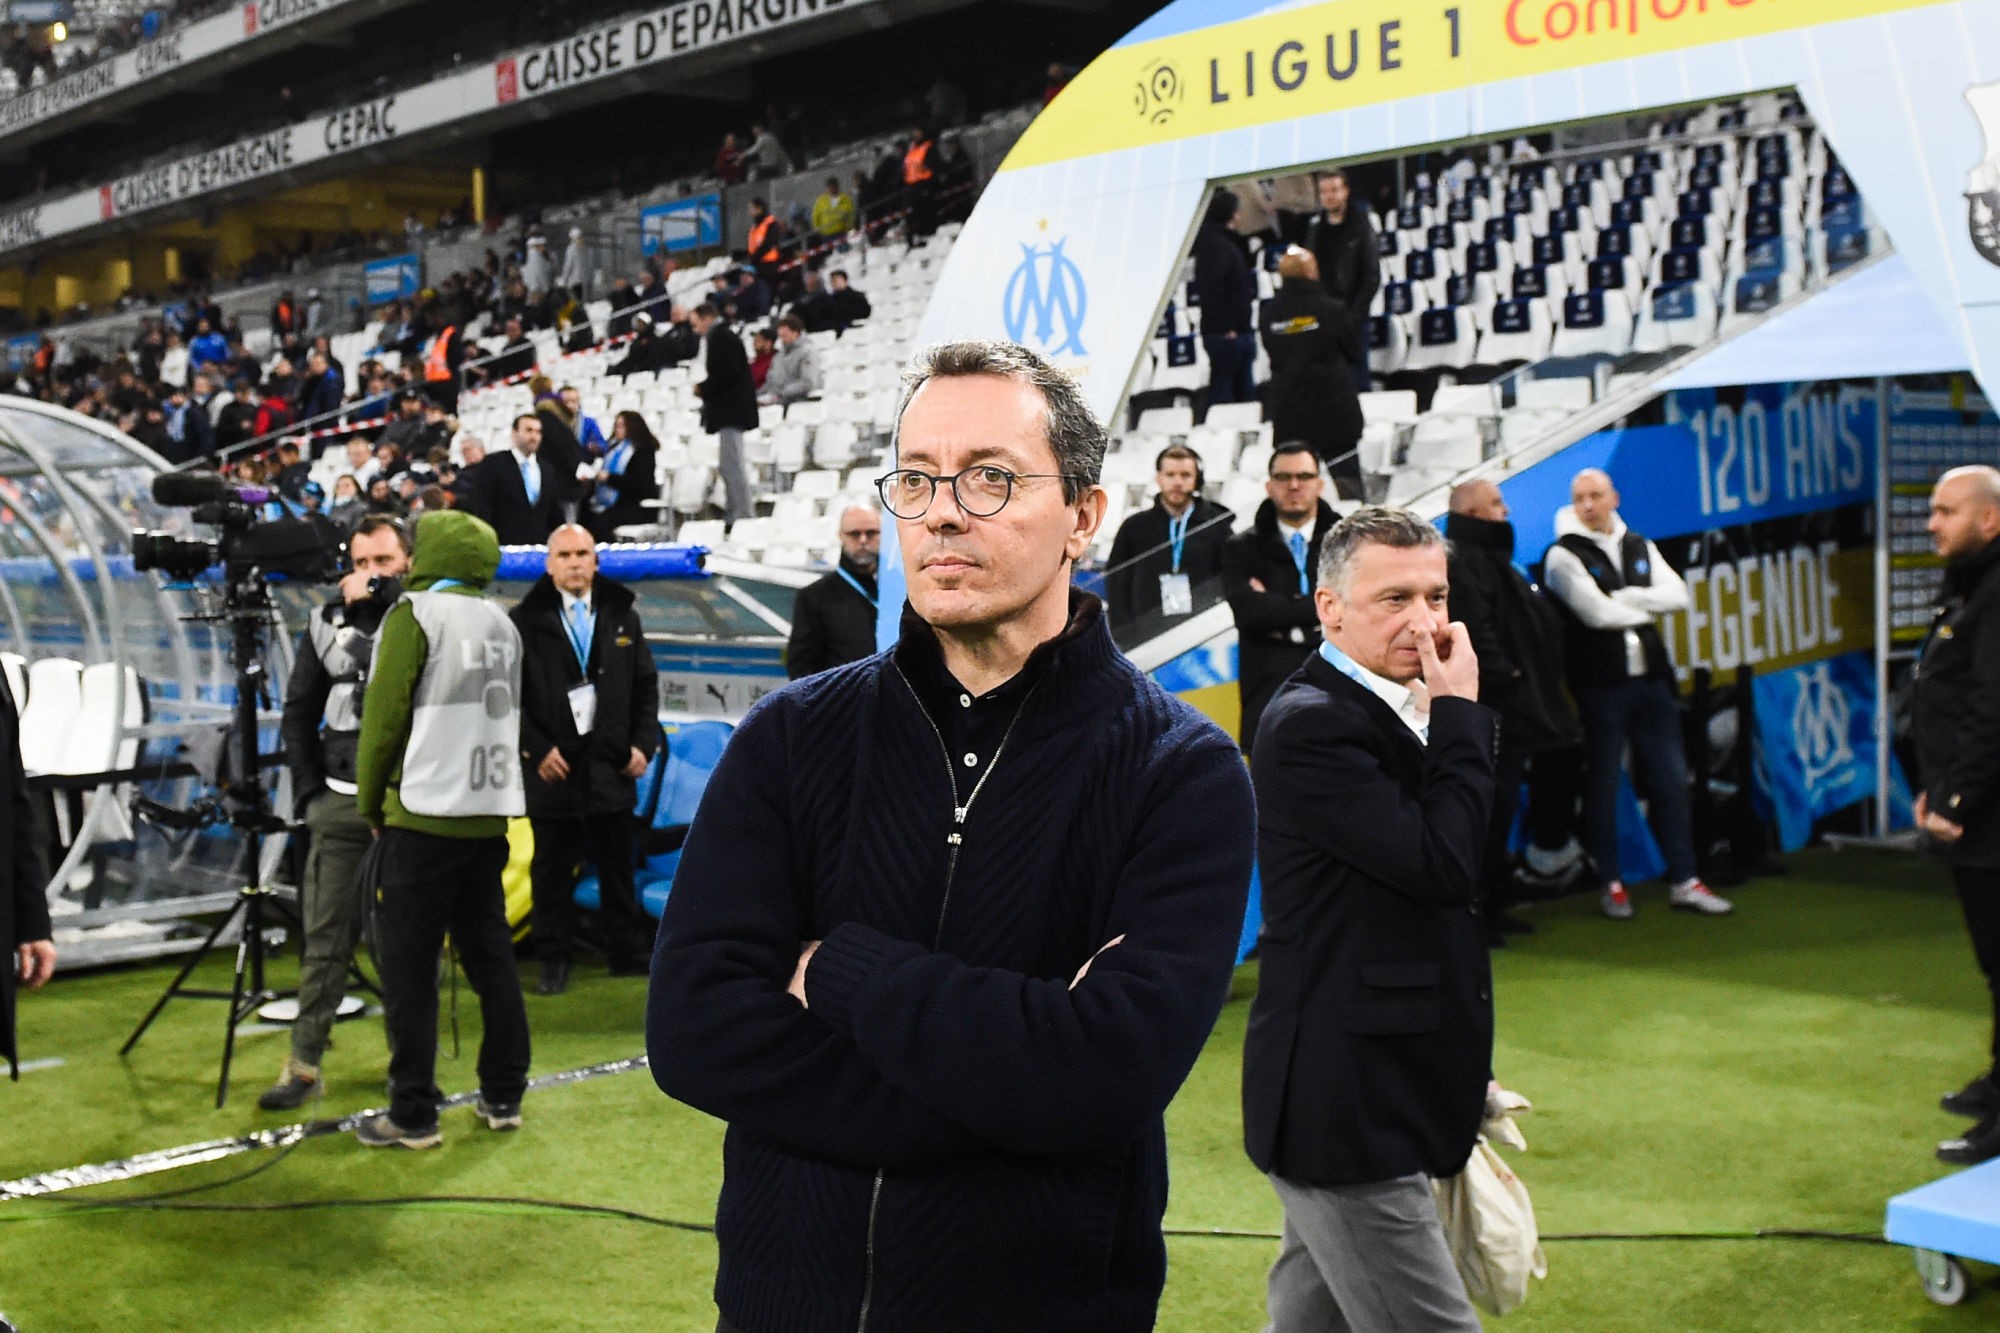 Jacques-Henri EYRAUD President of Marseille during the Ligue 1 match between Marseille and Amiens at Stade Velodrome on March 6, 2020 in Marseille, France. (Photo by Alexandre Dimou/Icon Sport) - Jacques-Henri EYRAUD - Orange Vélodrome - Marseille (France)